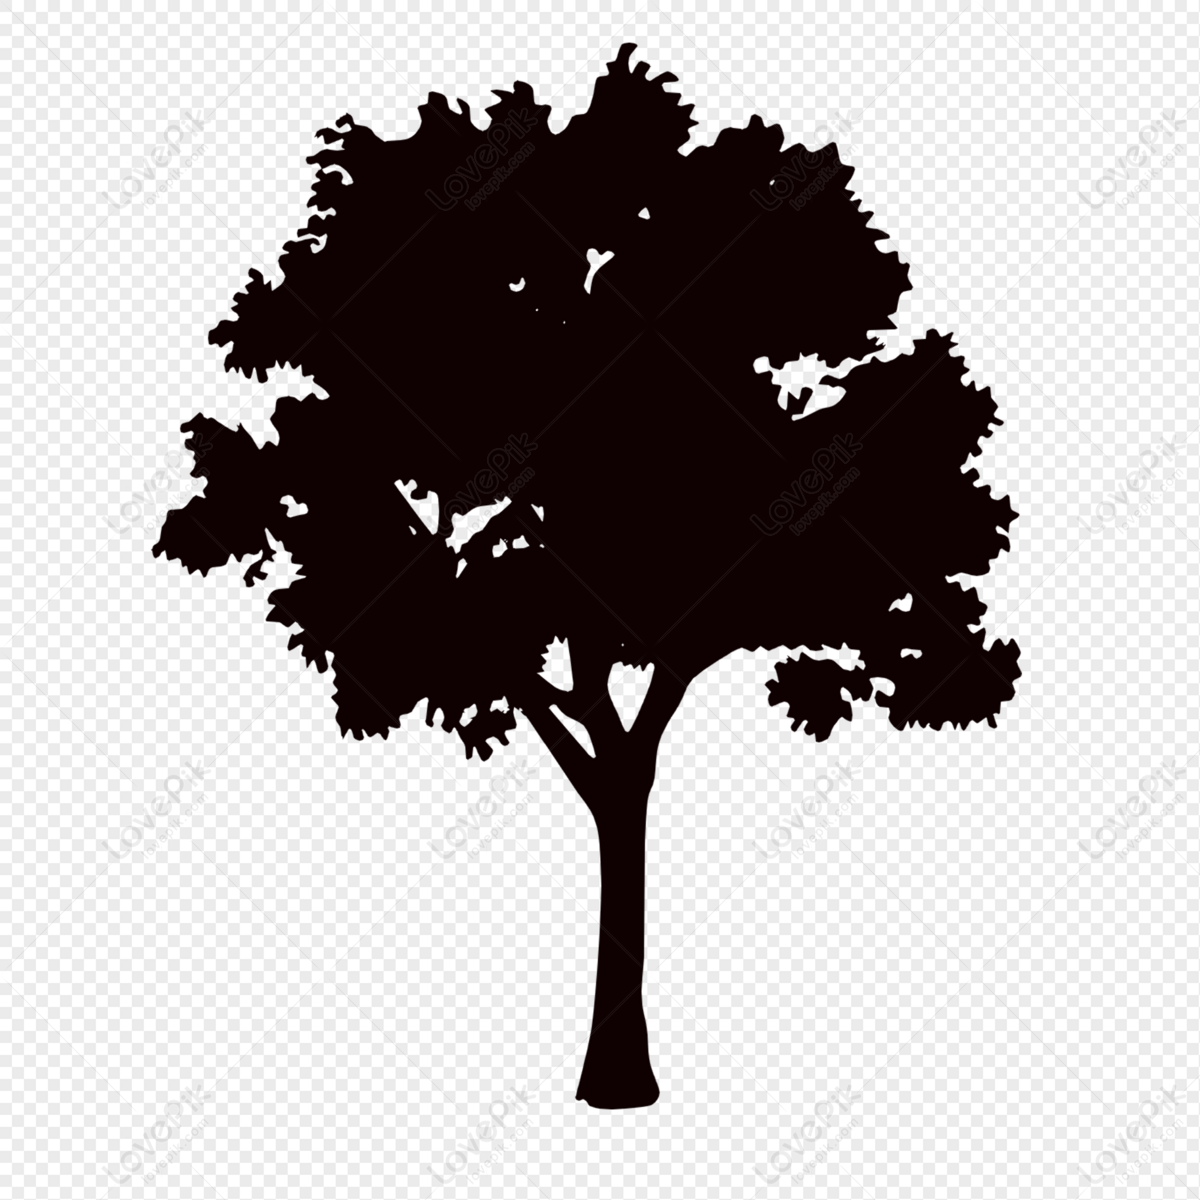 Tree silhouette, tree, black and white, natural png transparent background